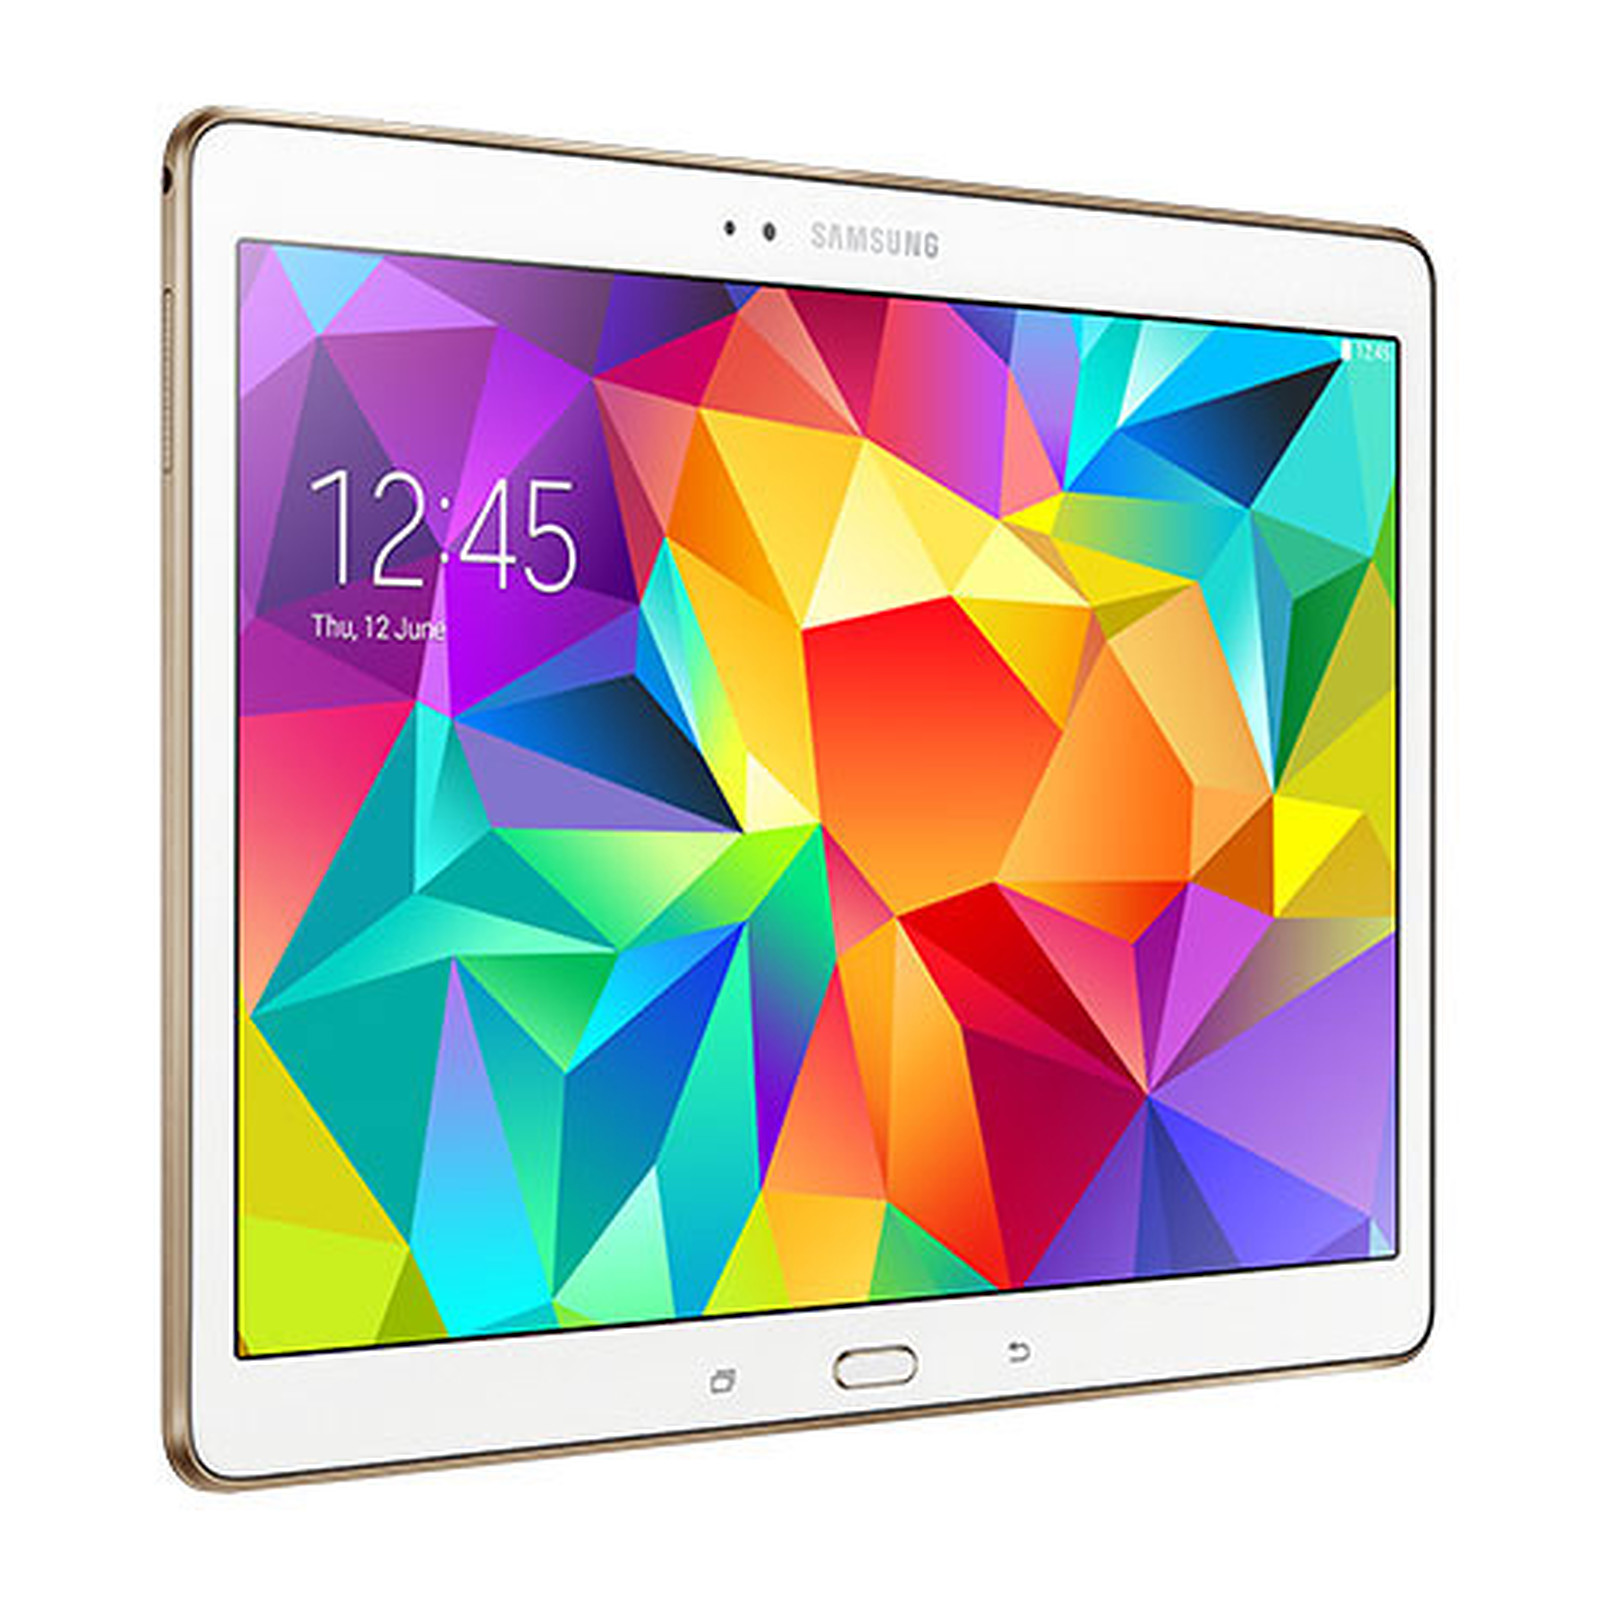 Samsung Galaxy Tab S 10.5" SM-T800 16 Go Blanche · Reconditionne - Tablette tactile Samsung